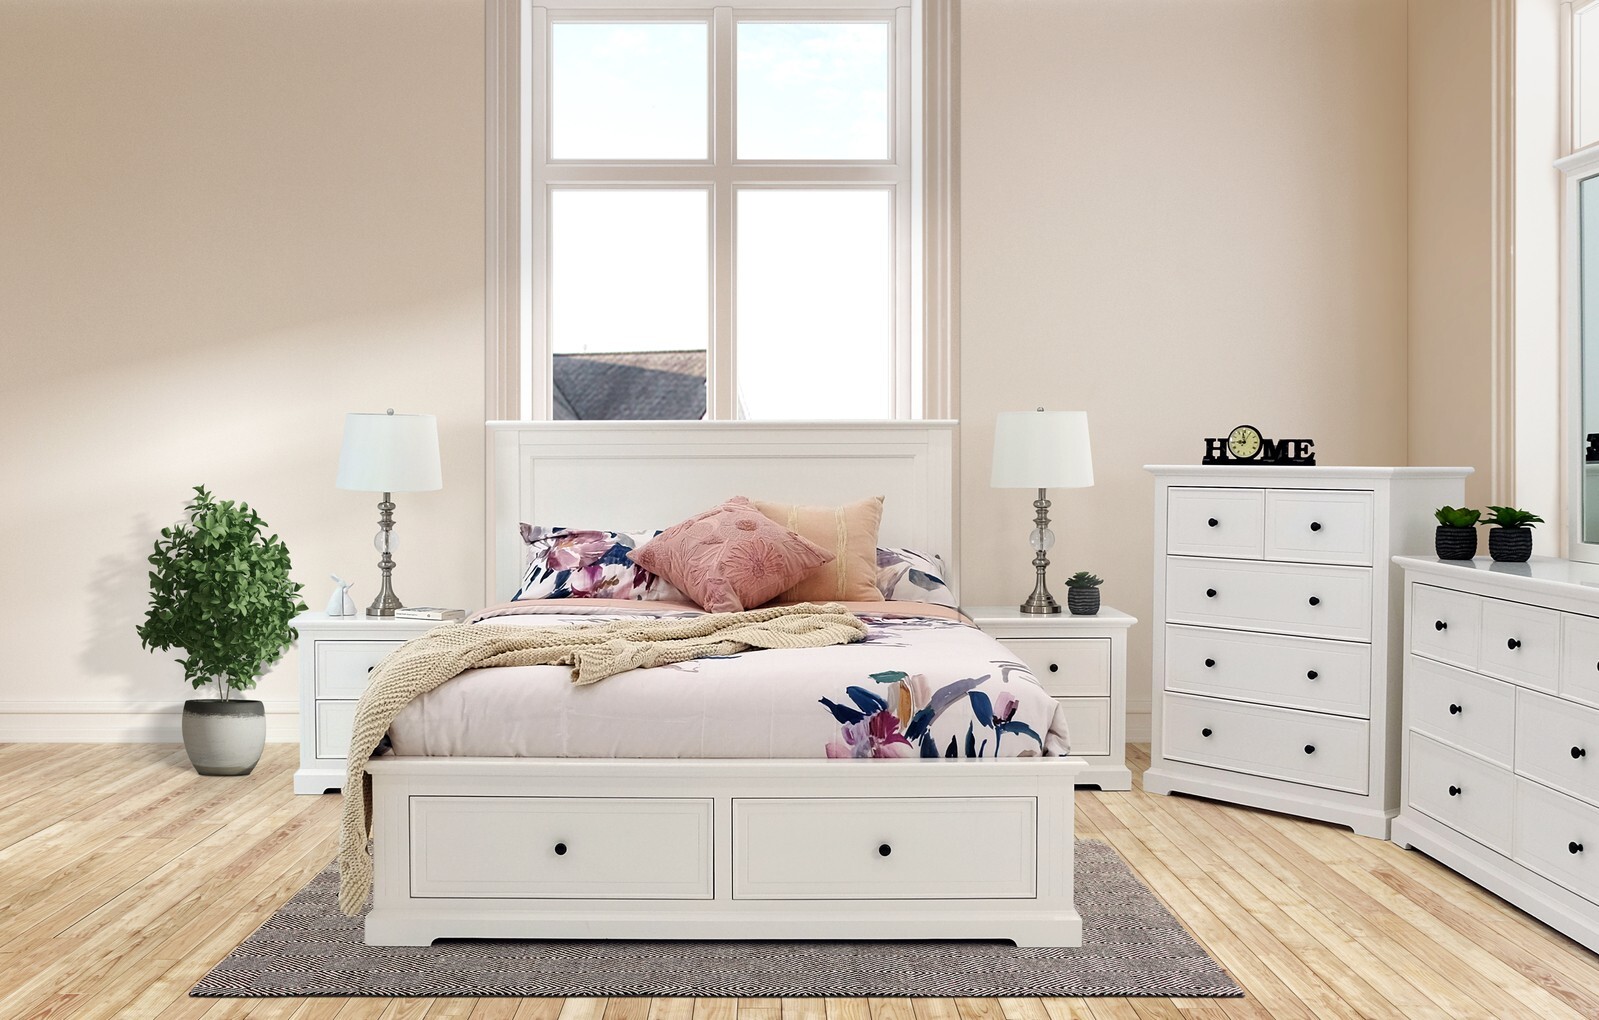 Abigail Double Bed Frame